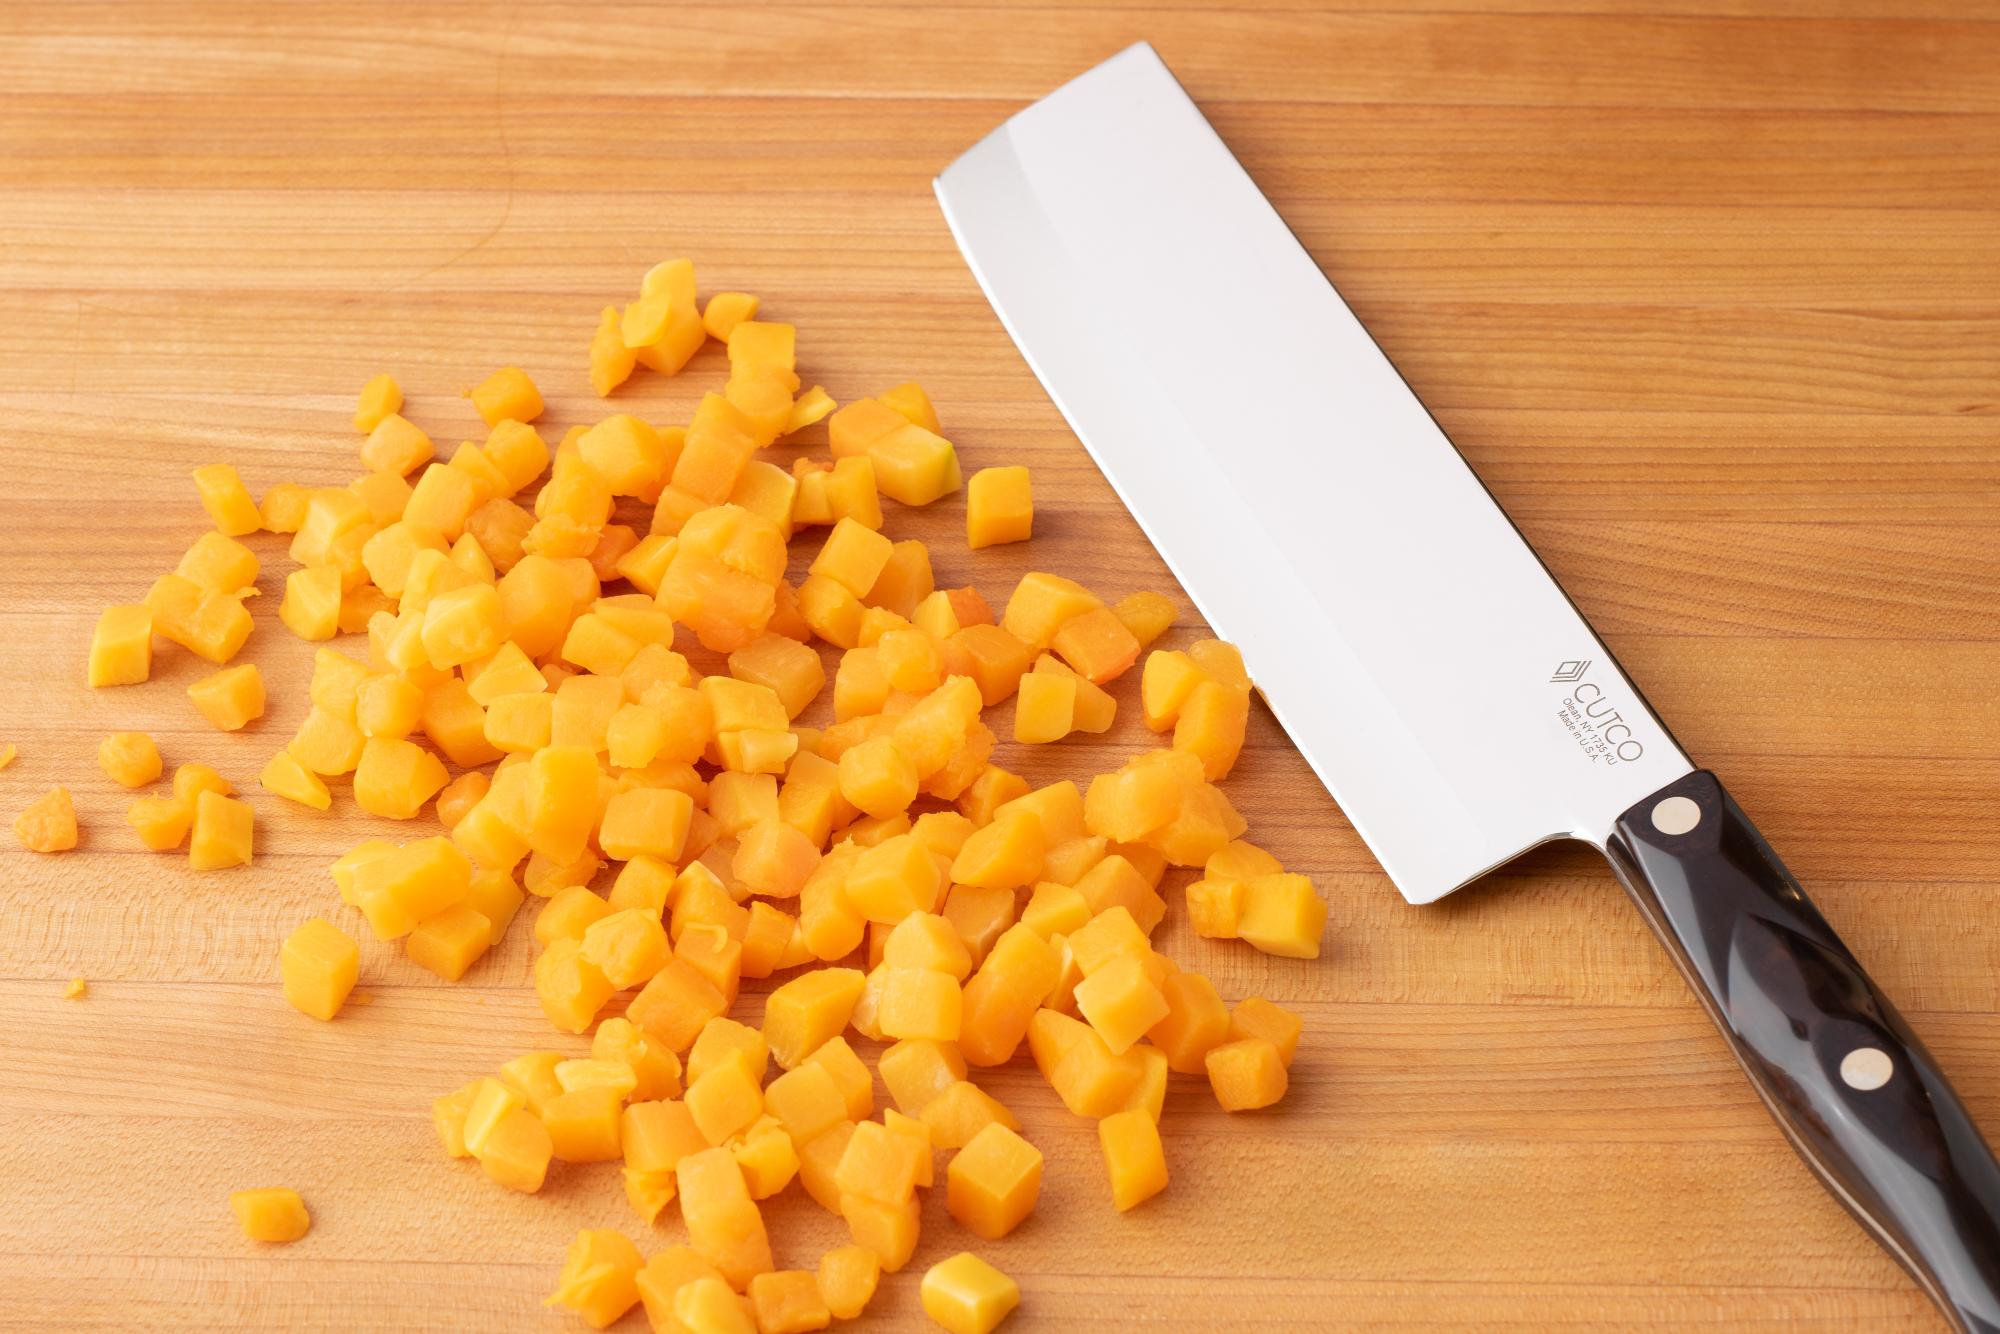 A Vegetable Knife is perfect for dicing the squash.